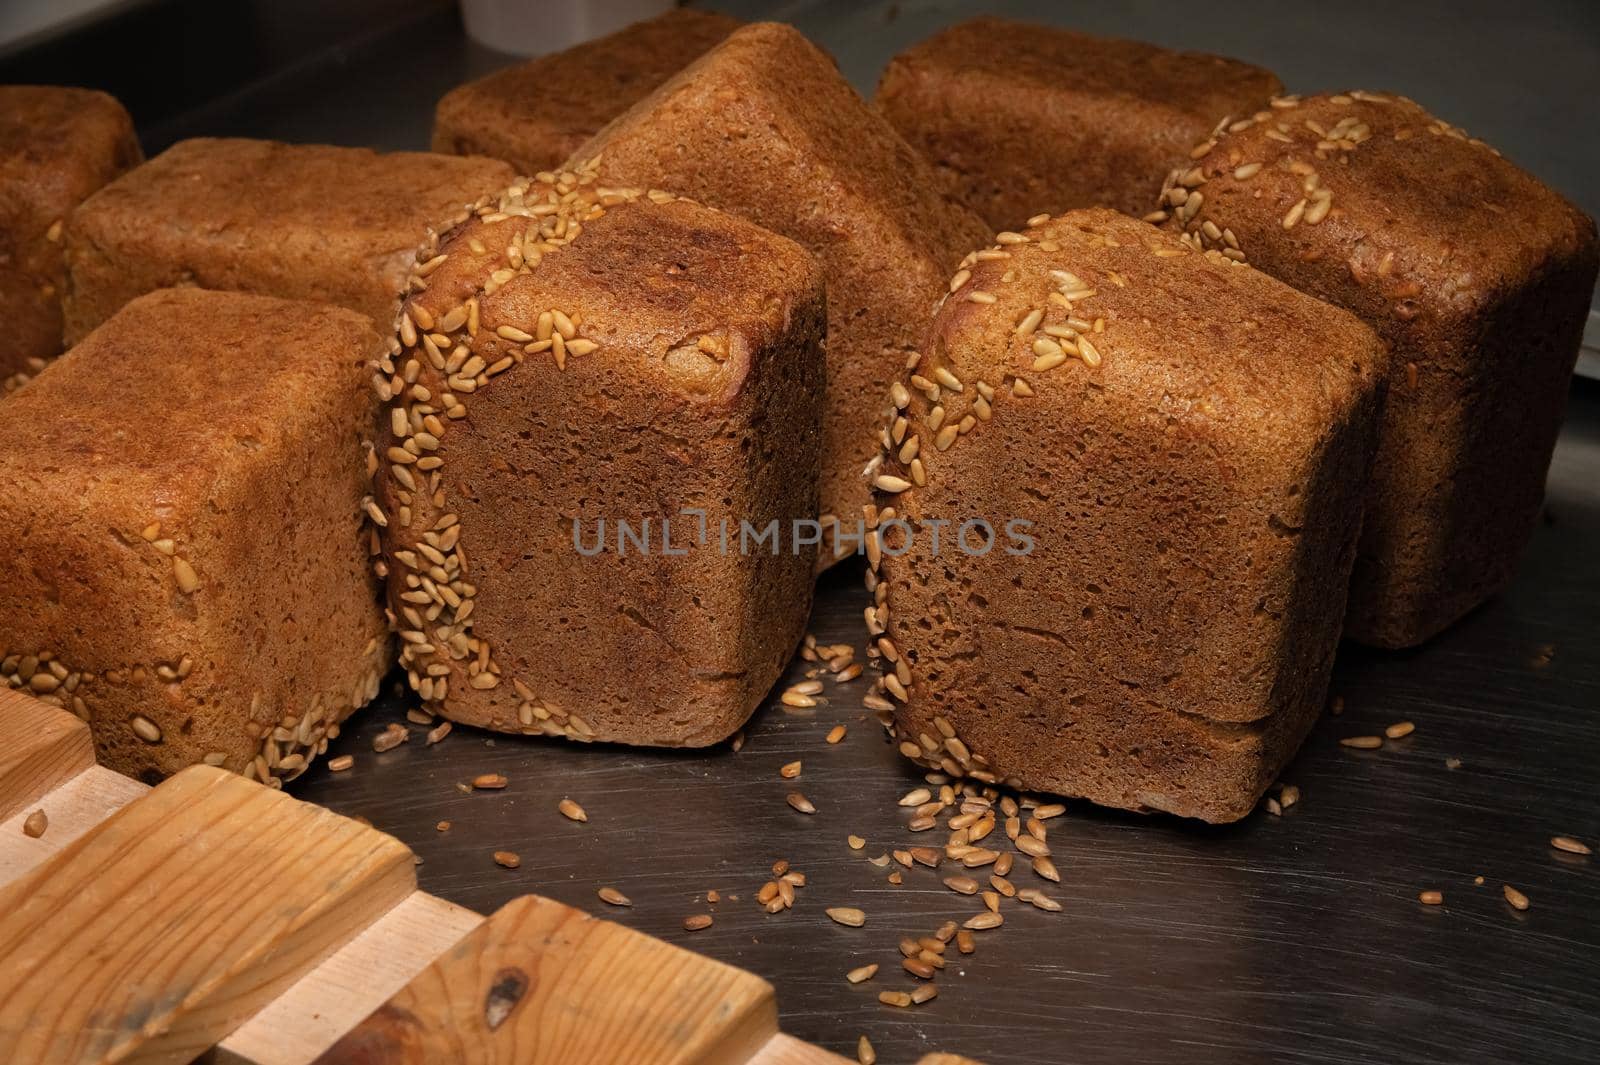 A lot of whole delicious homemade rectangular rye bread with sunflower seeds on top lies on a wooden rack background.